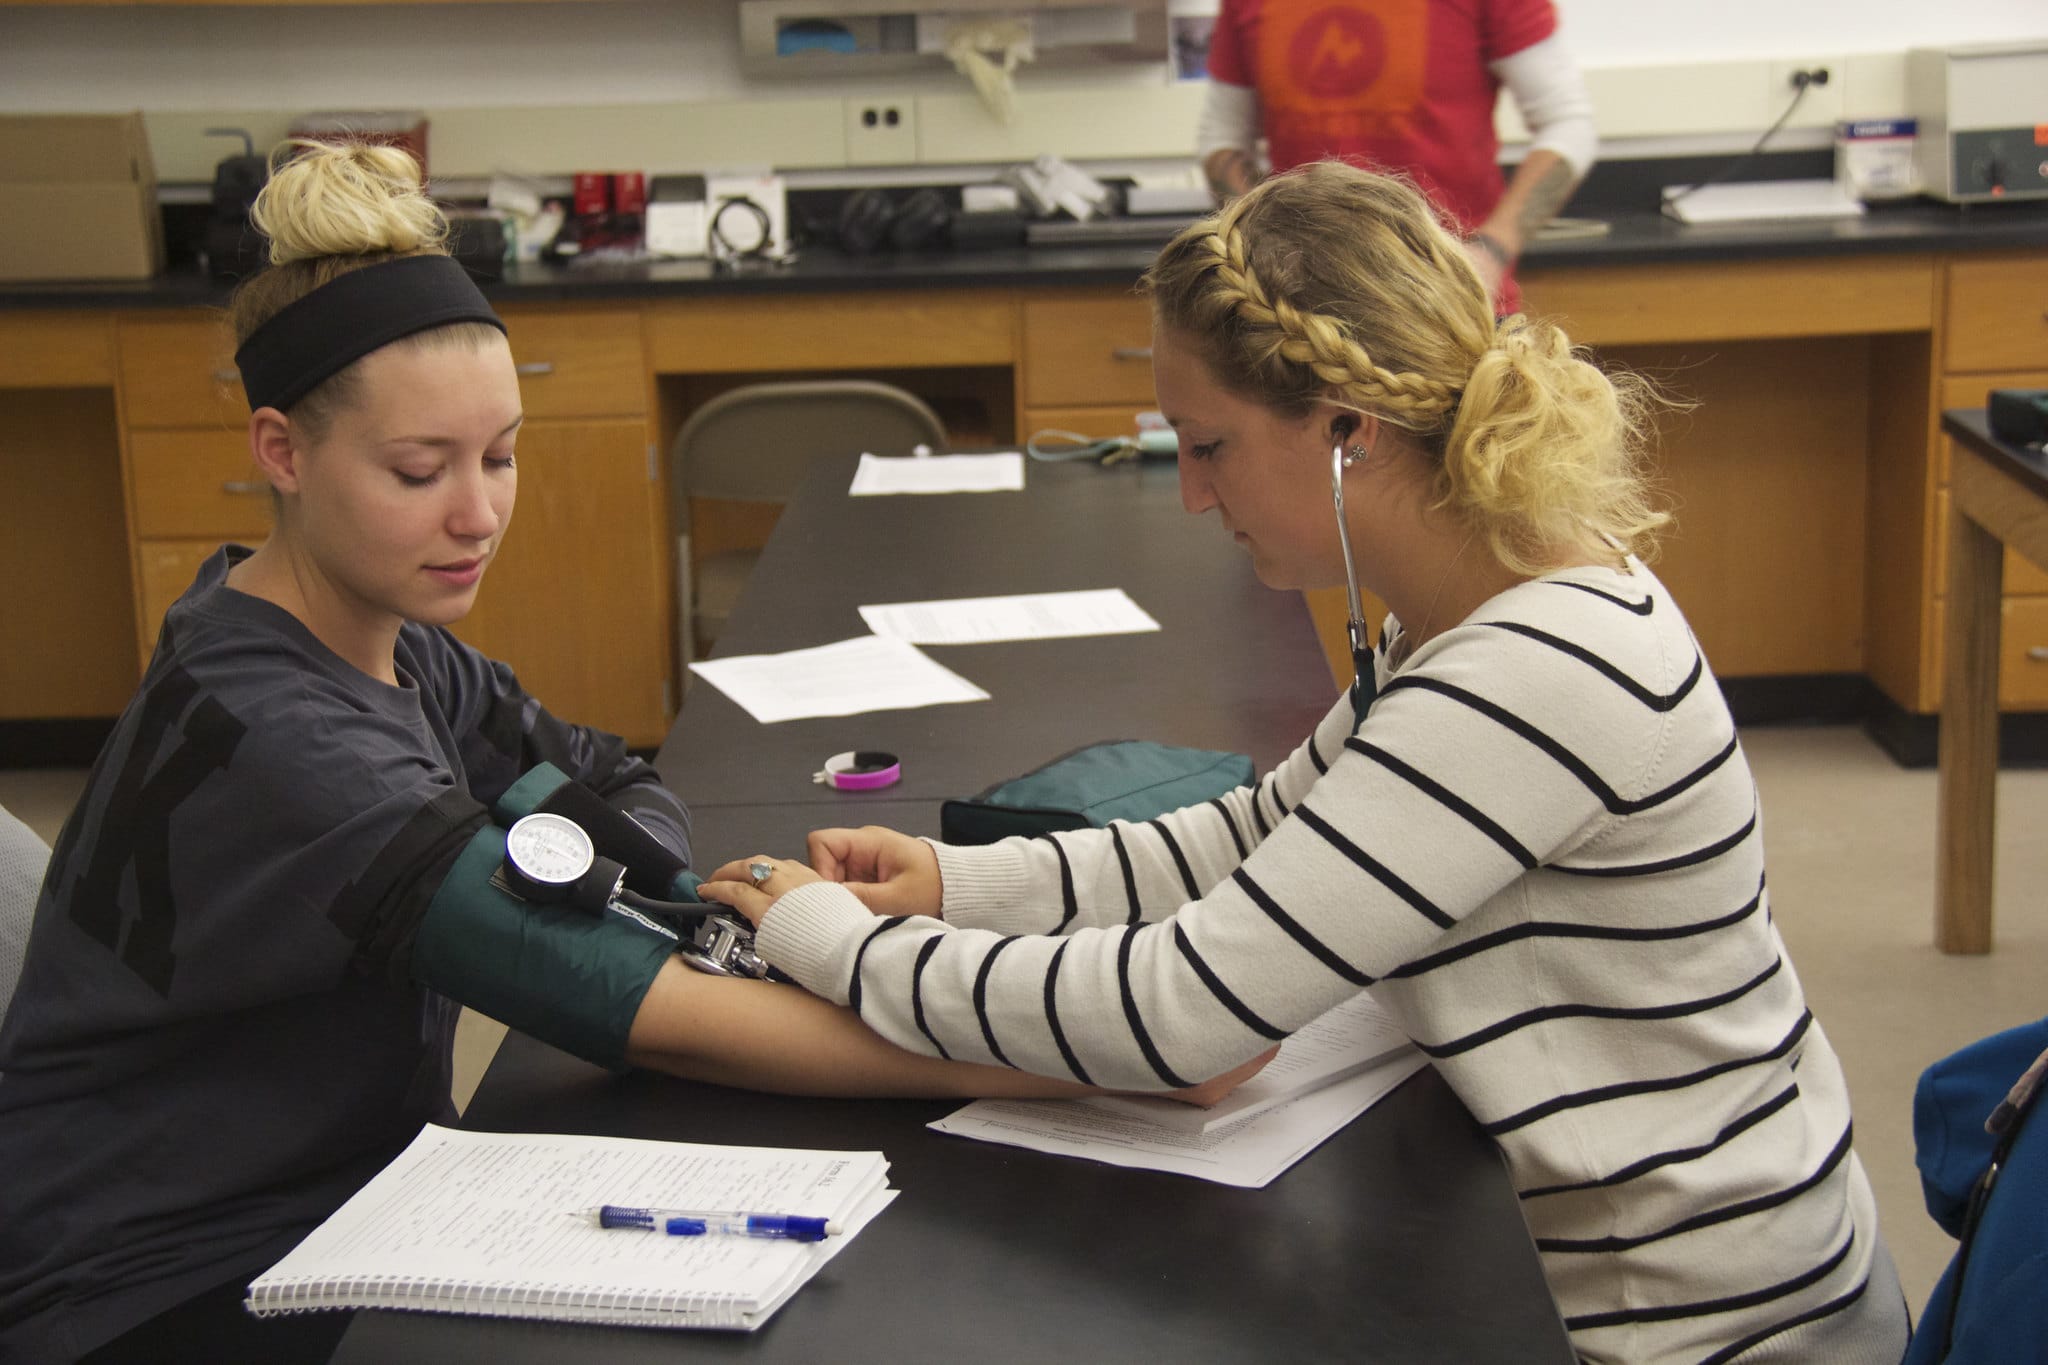 At Vermont State University, two women are taking their blood pressure in a lab.